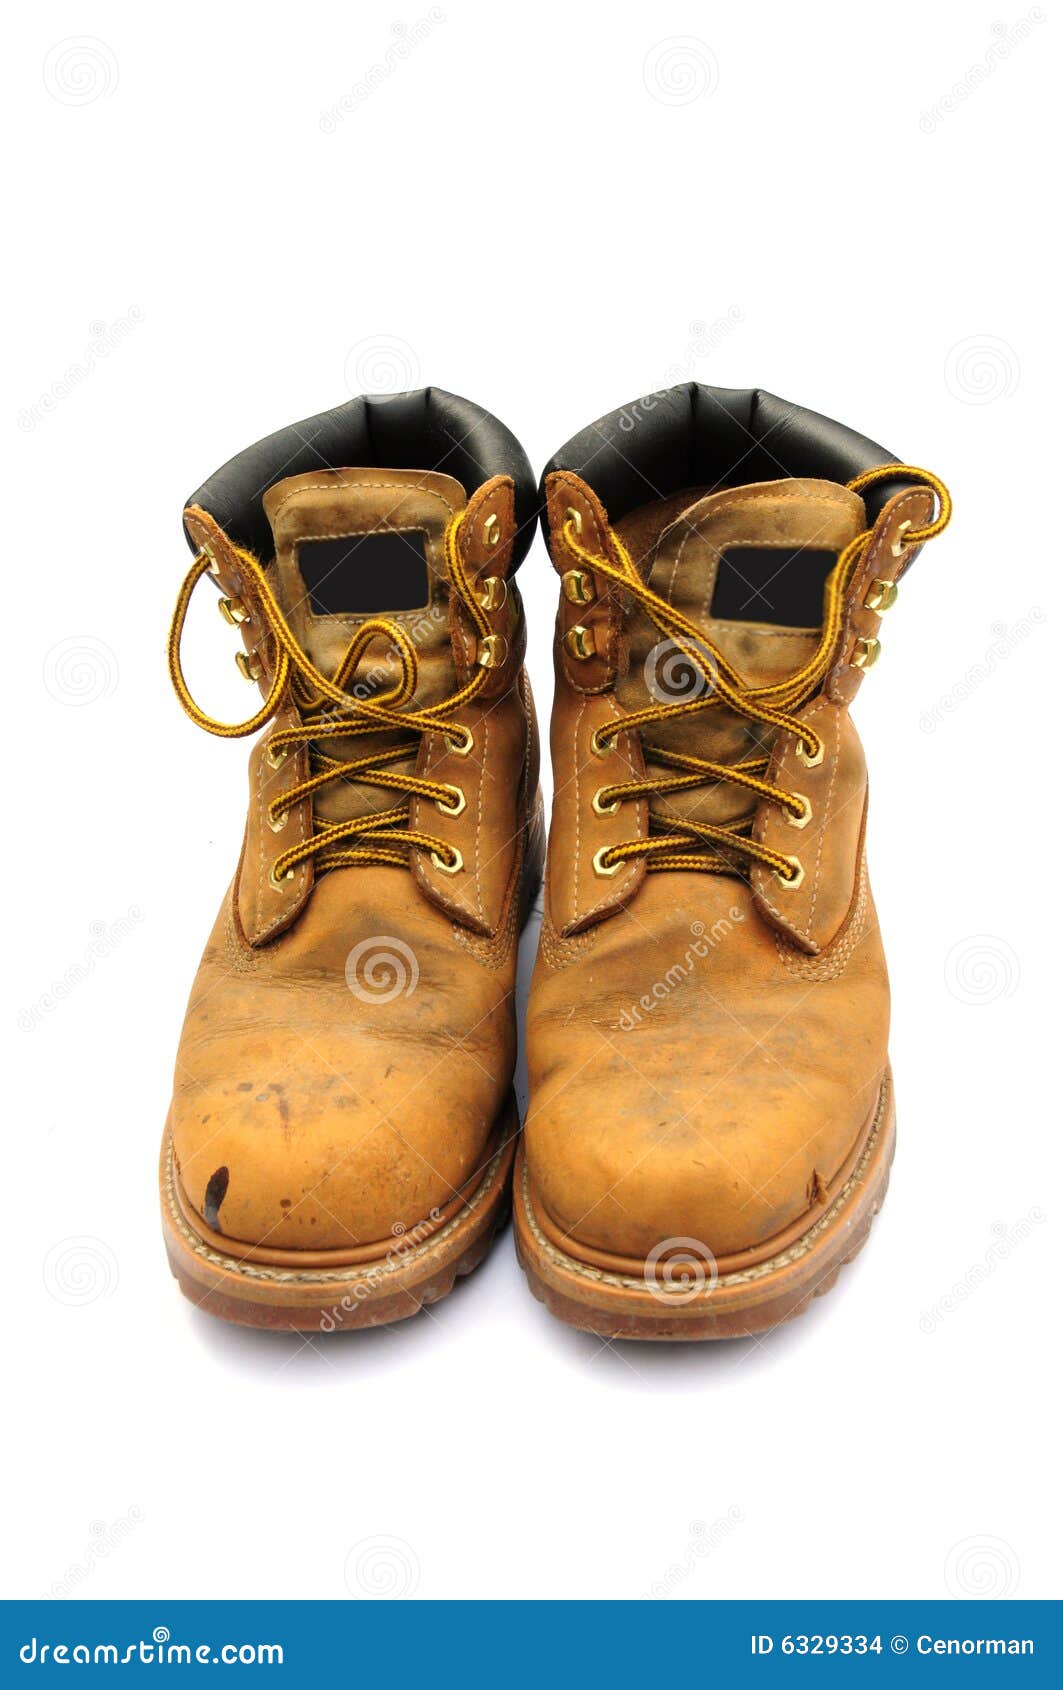 Work boots stock photo. Image of 